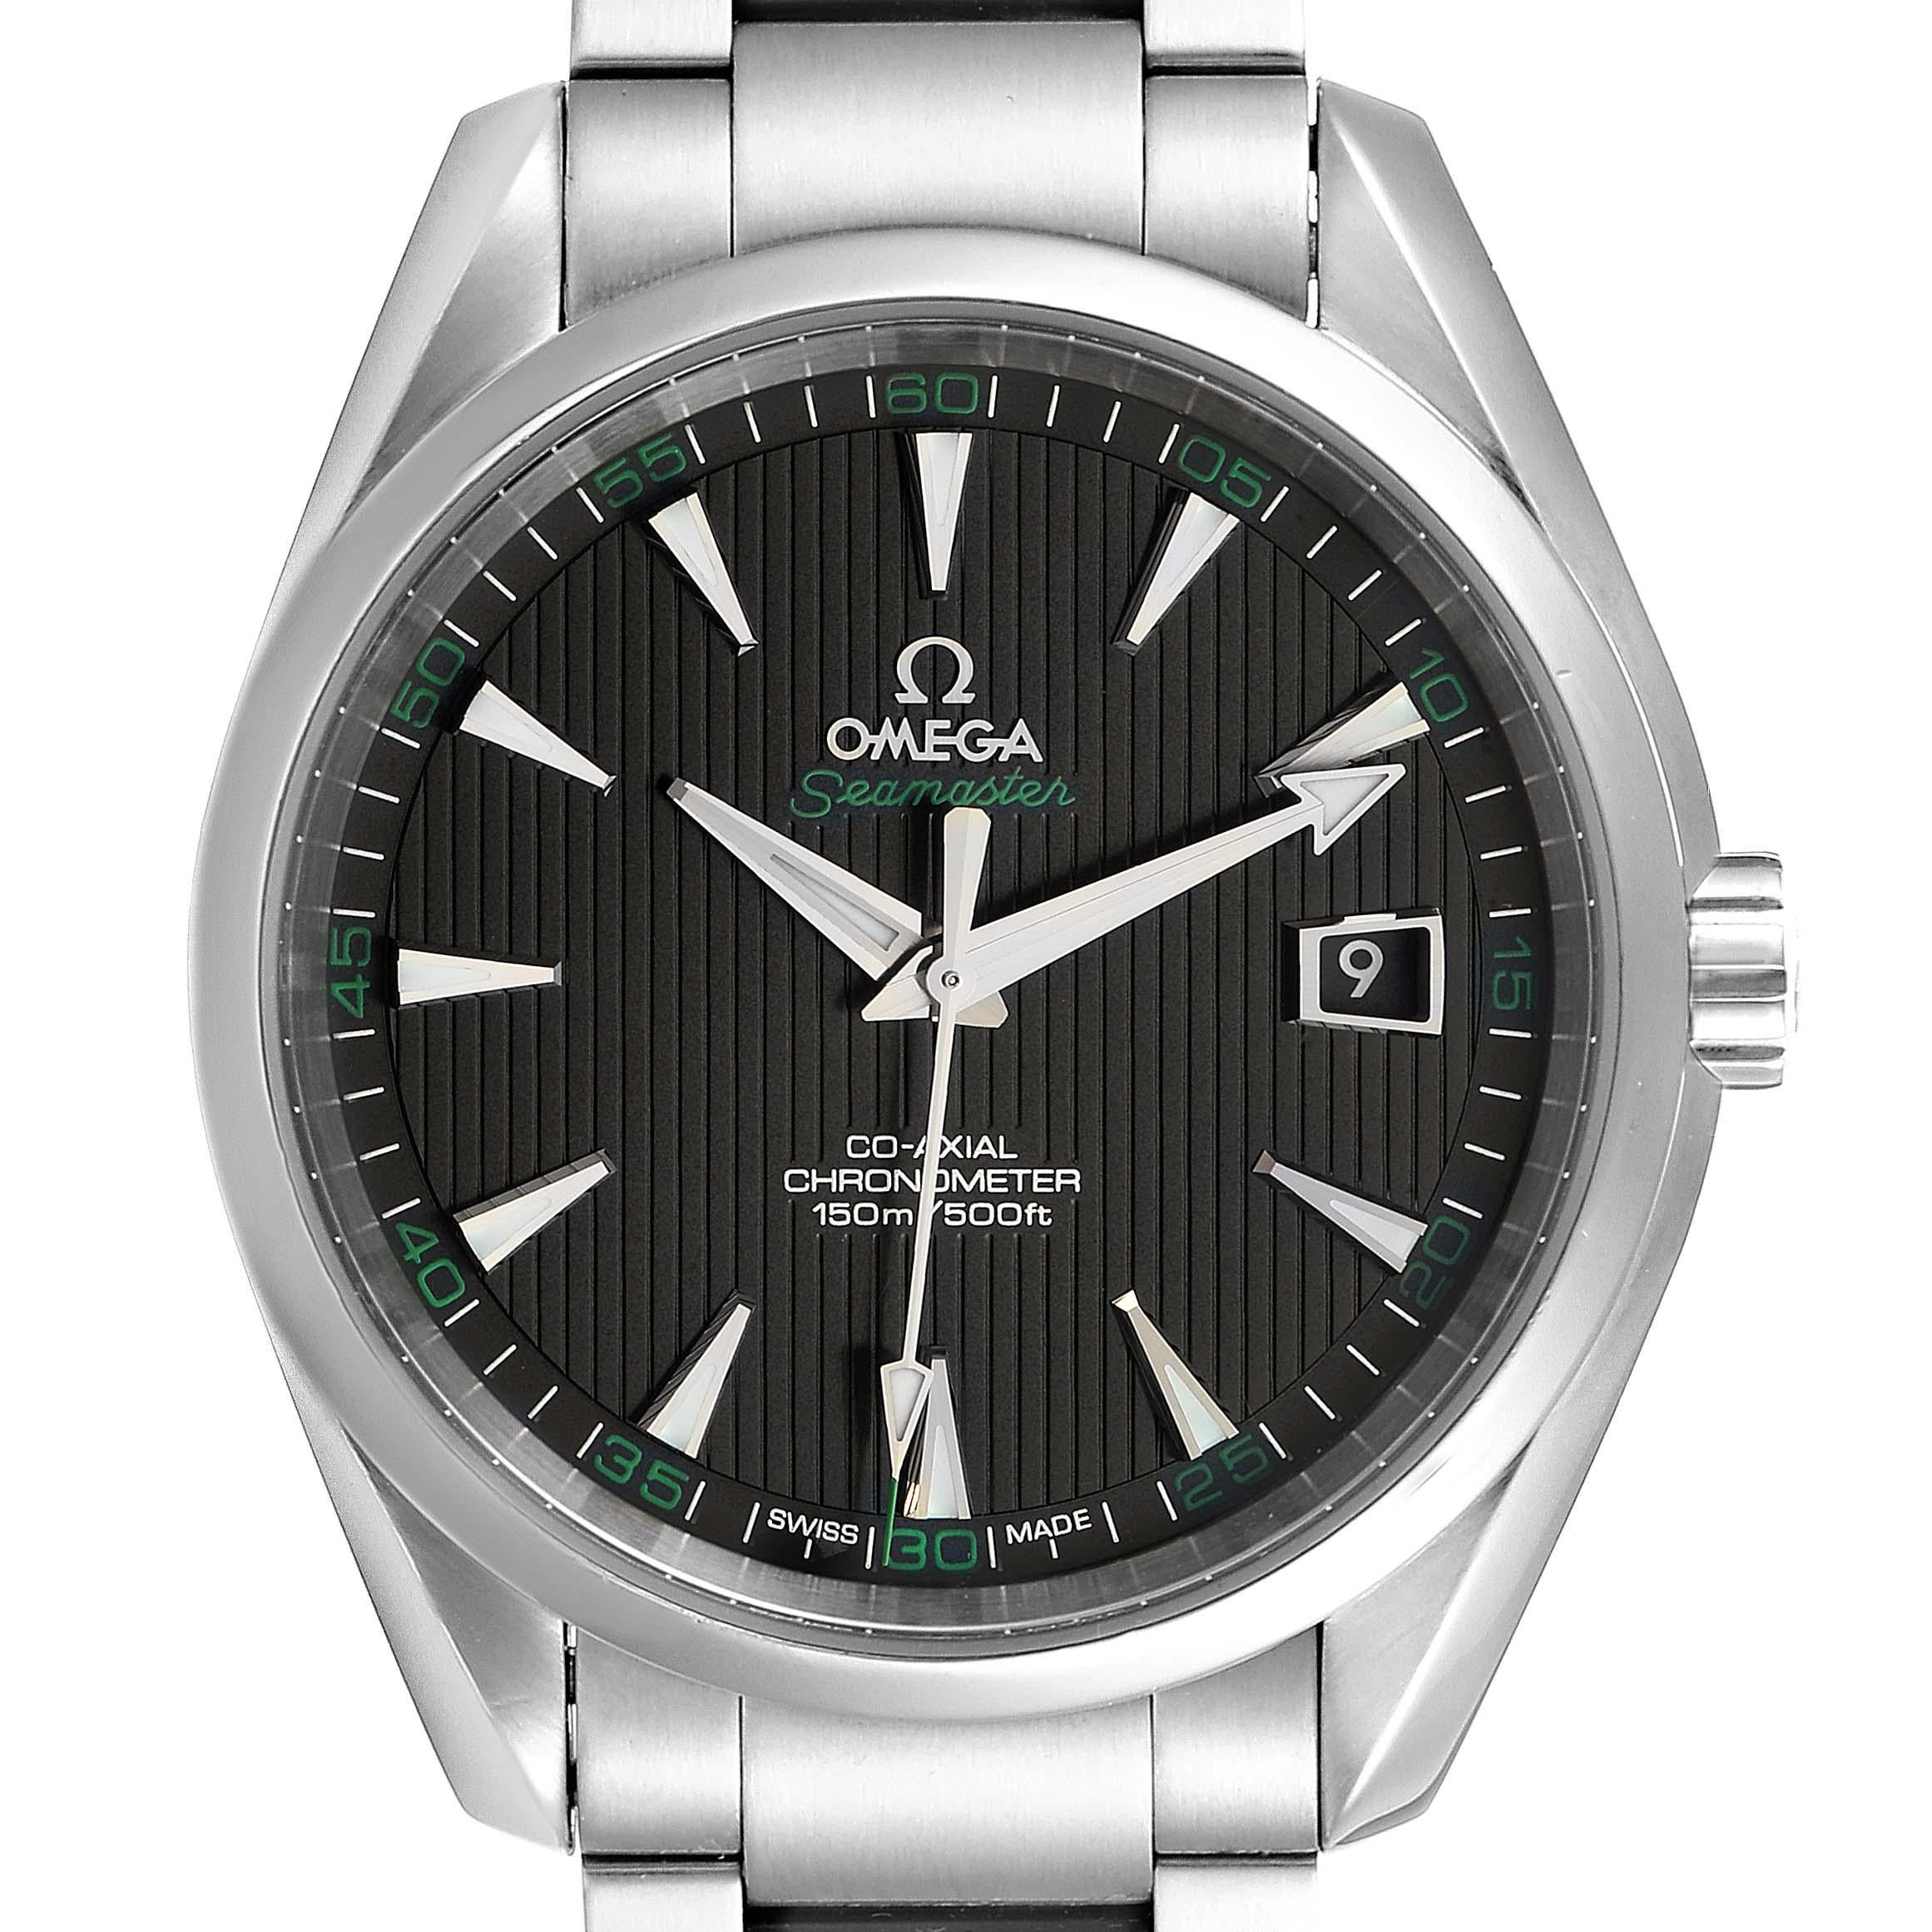 Omega Seamaster Aqua Terra Golf Edition Mens Watch 231.10.42.21.01.001. Automatic self-winding movement. Stainless steel round case 41.5 mm in diameter. Transparent case back. Stainless steel smooth bezel. Scratch resistant sapphire crystal. Black